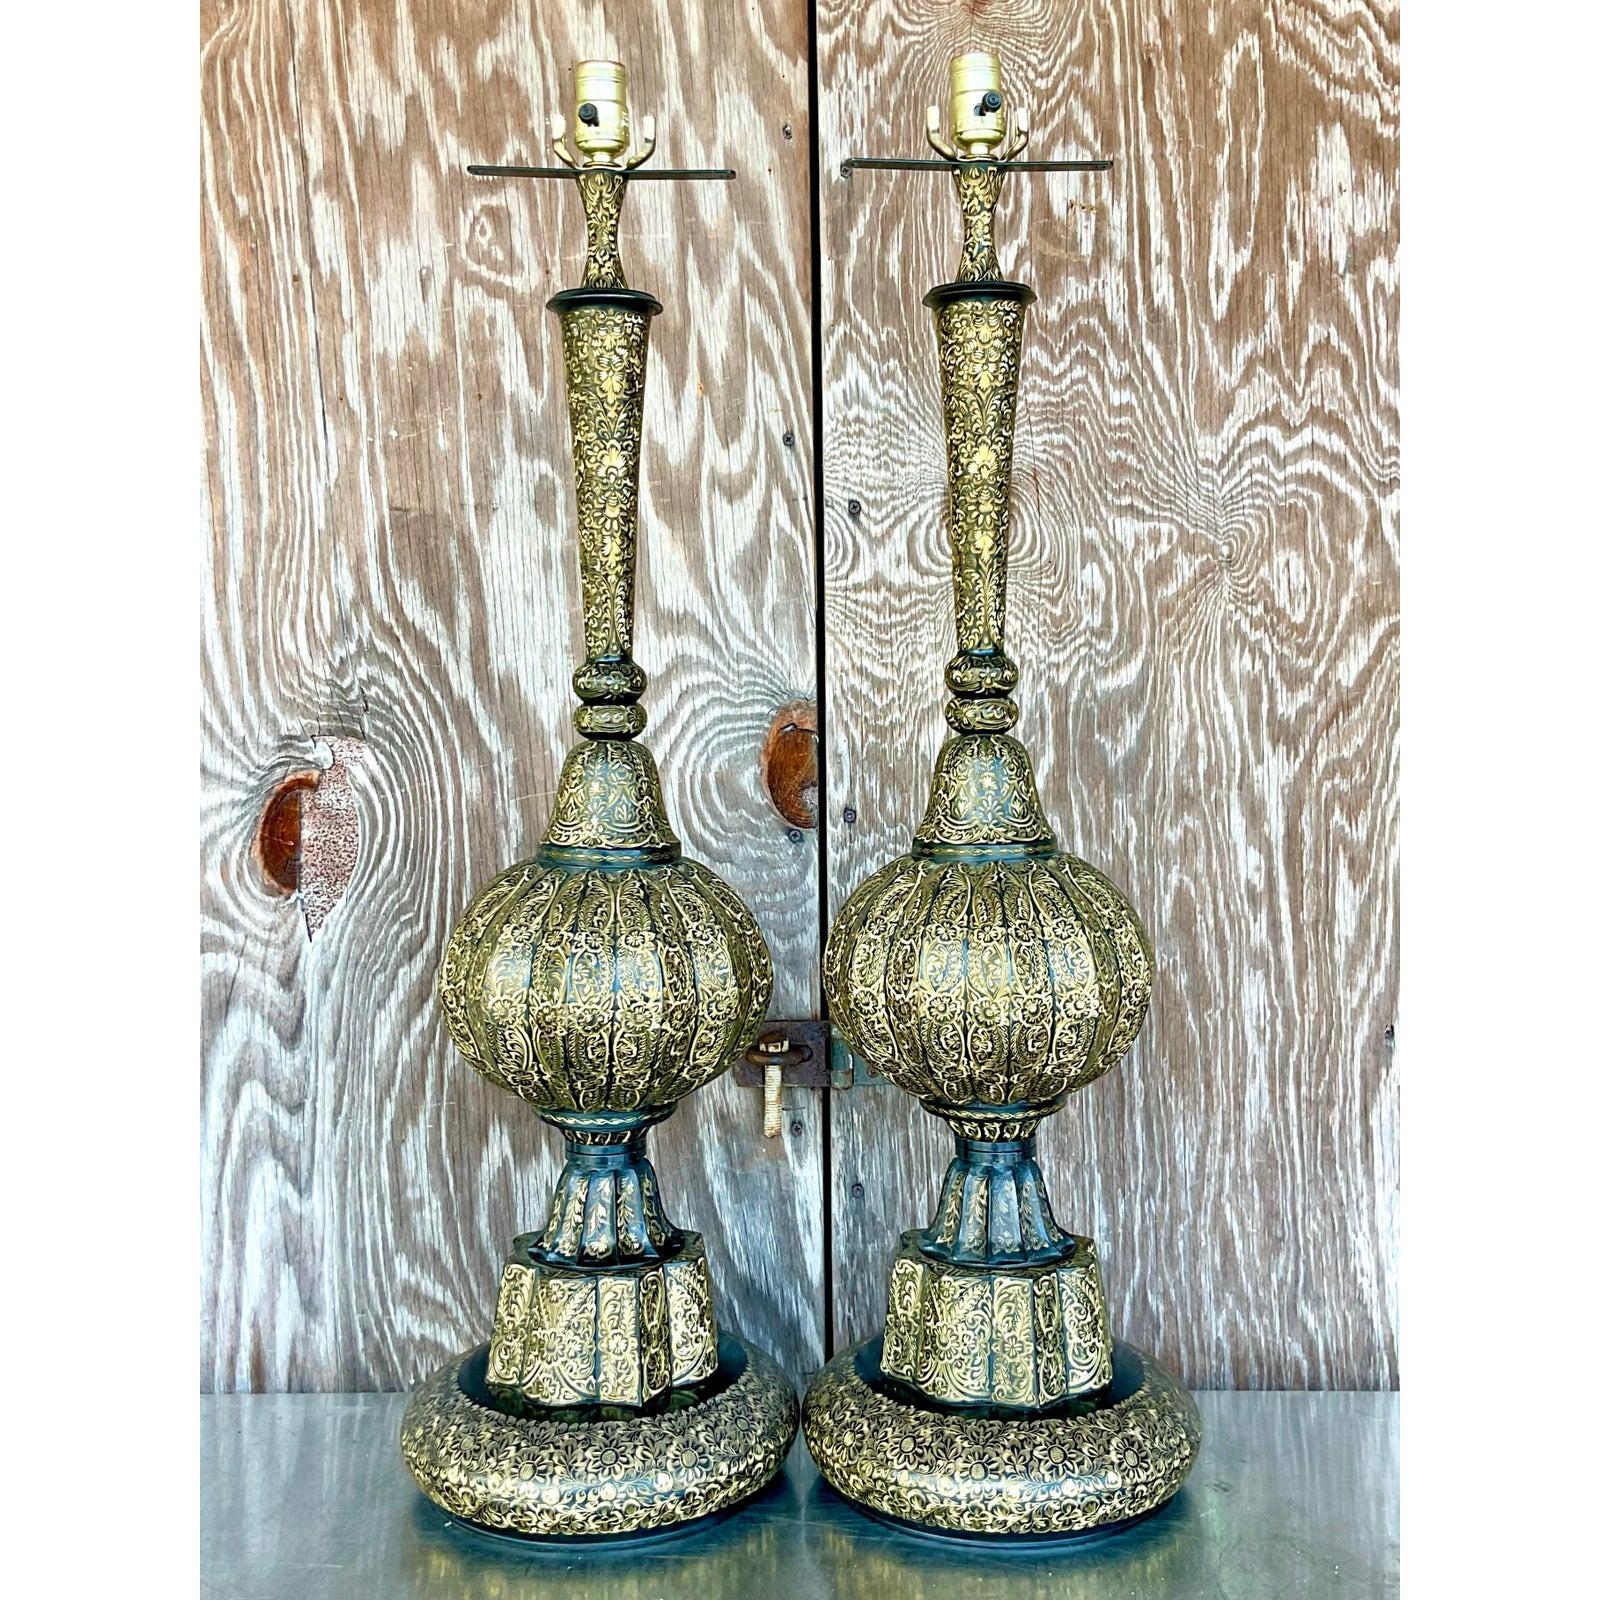 20th Century Vintage Boho Moroccan Etched Enamel and Brass Lamps - a Pair For Sale